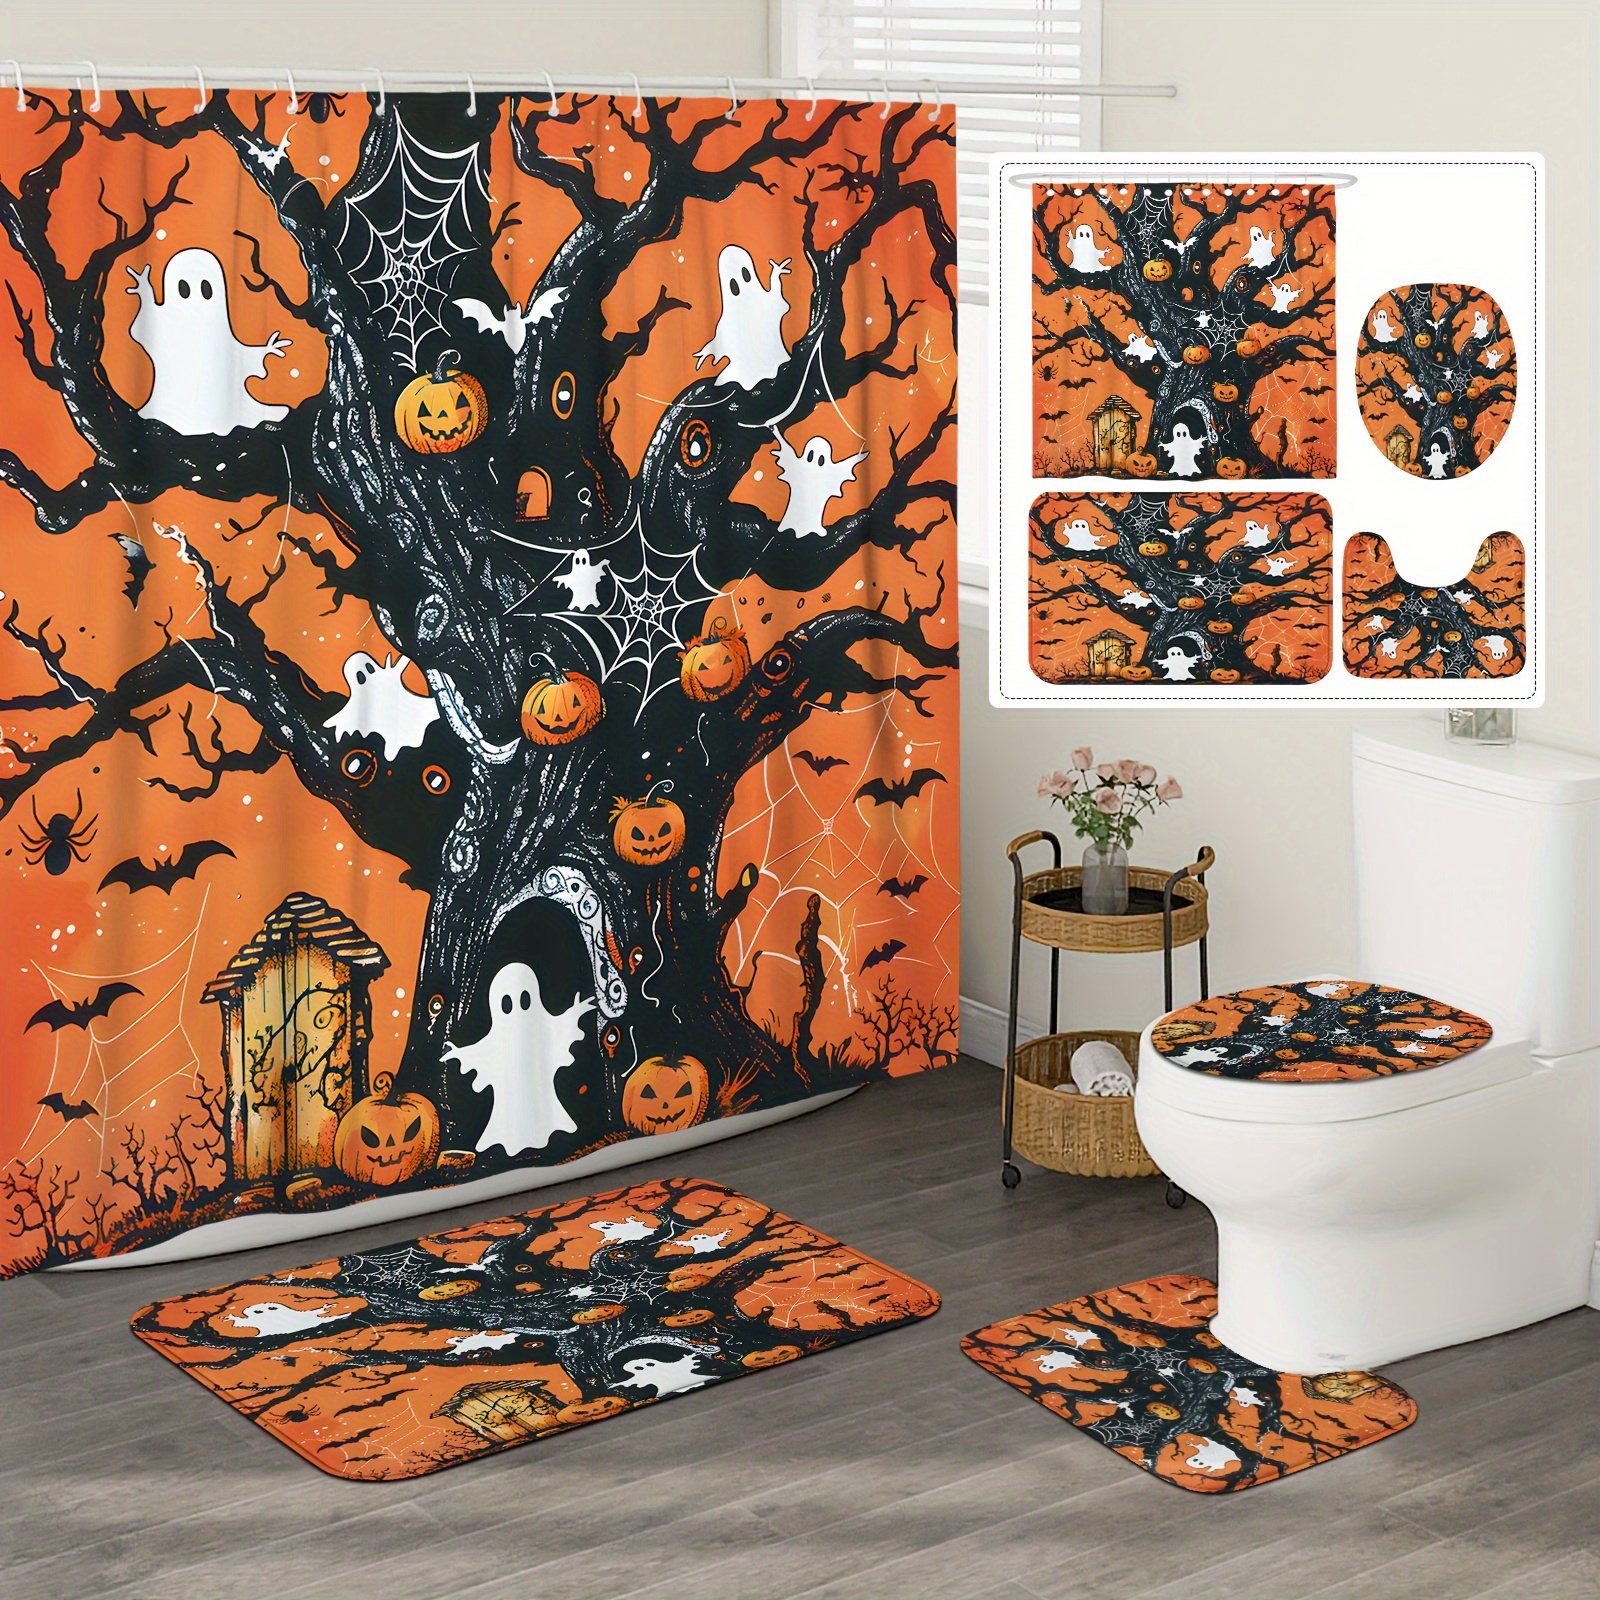 

Halloween Shower Curtain Set With Bath Mat, U-shape Toilet Mat, Lid Cover And Hooks – Horror Vintage Pumpkin Ghost Tree Design, Water-resistant Polyester, Machine Washable, All-season Bathroom Decor